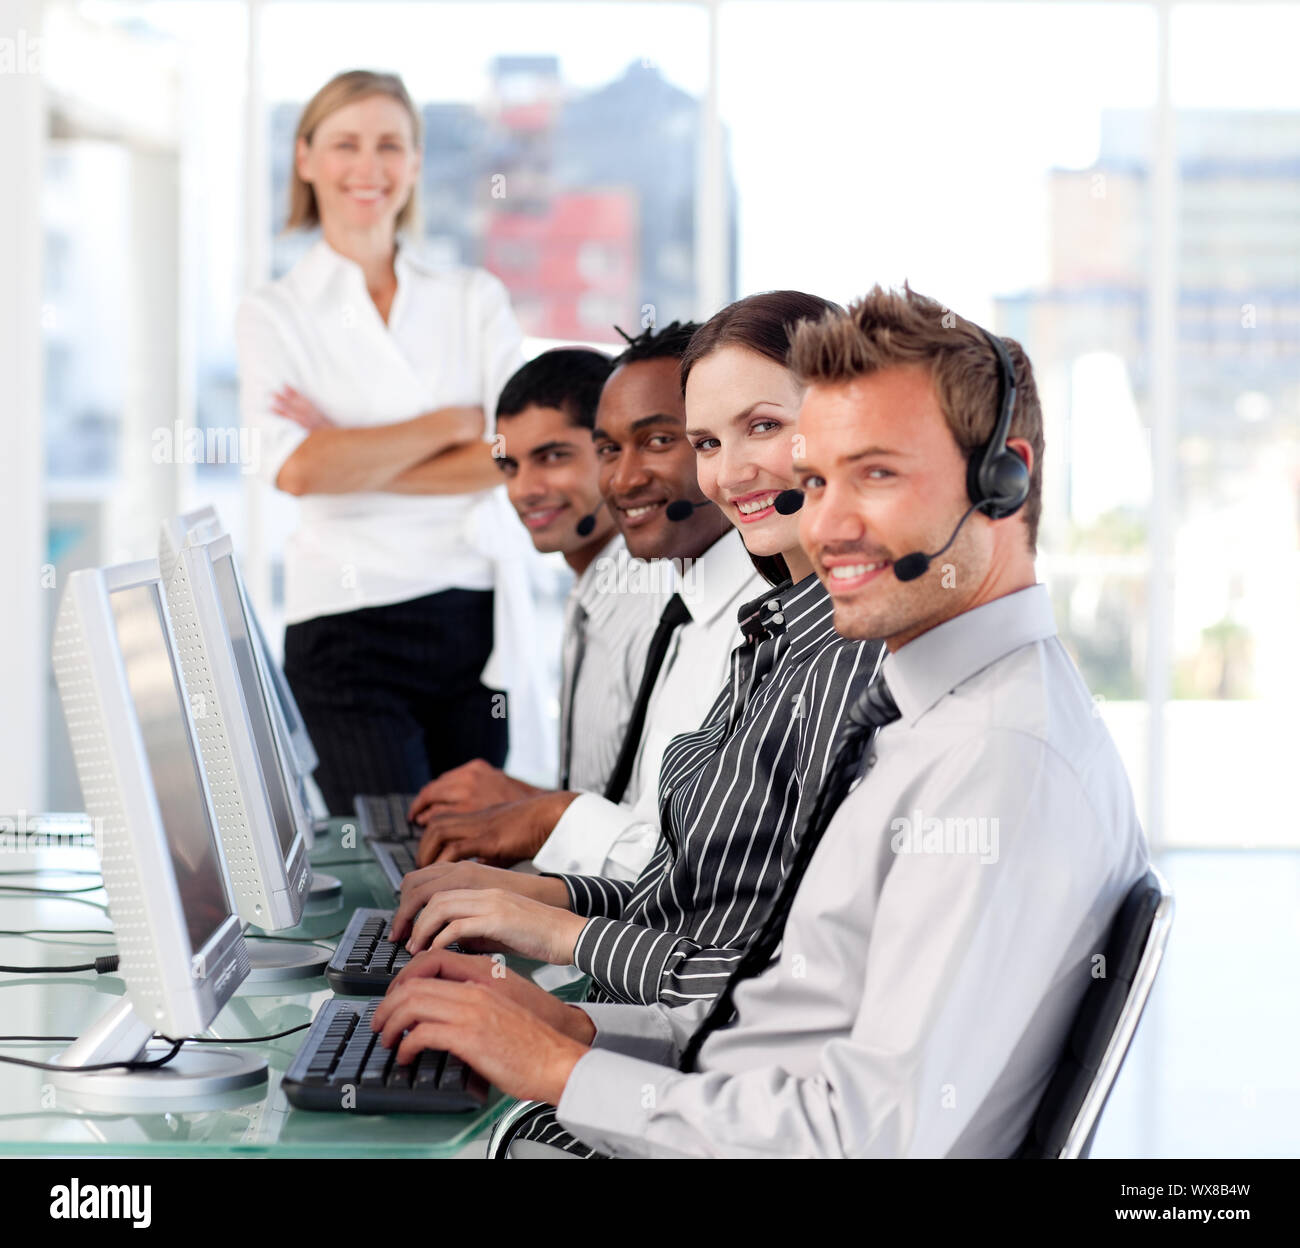 Cheerful female leader managingher team in a call center Stock Photo